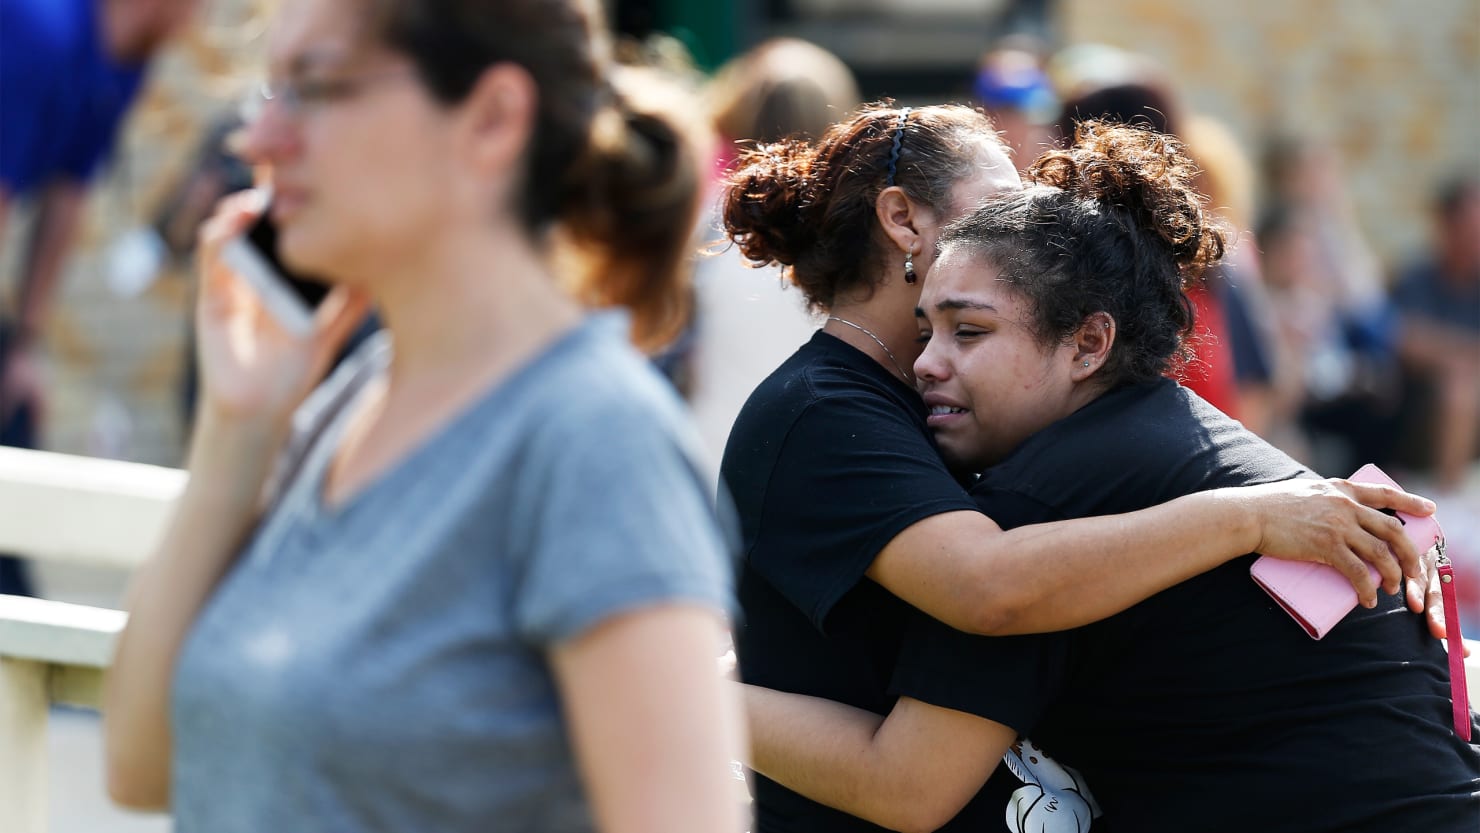 The All-American Ritual of a School Shooting, This Time in Santa Fe